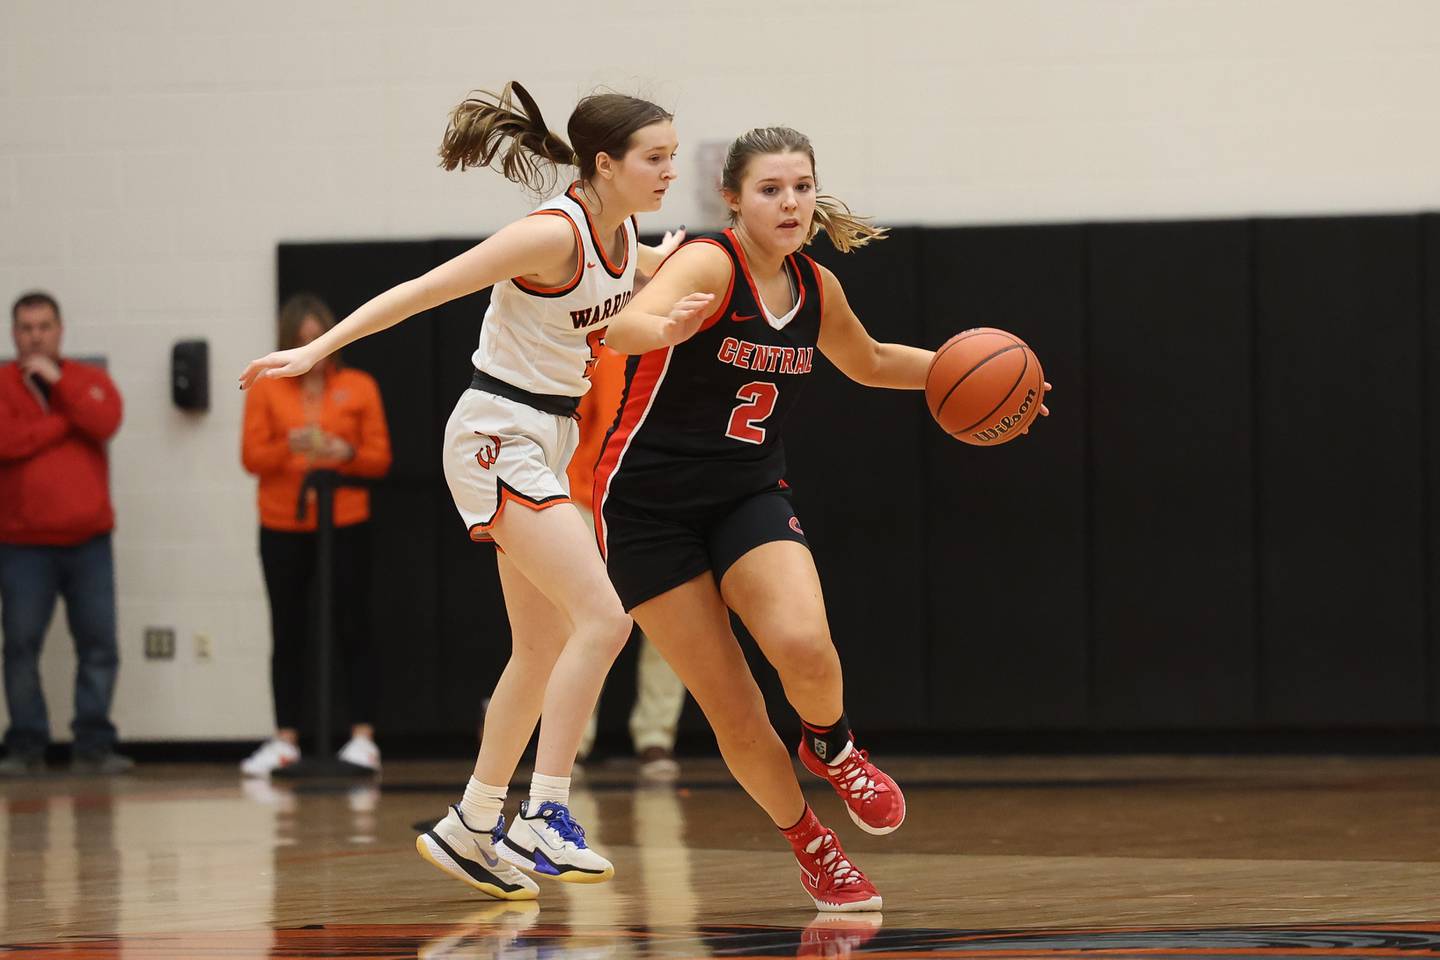 Lincoln-Way Central’s Gracen Gehrke works the ball upcourt against Lincoln-Way West on Tuesday, February 7th..